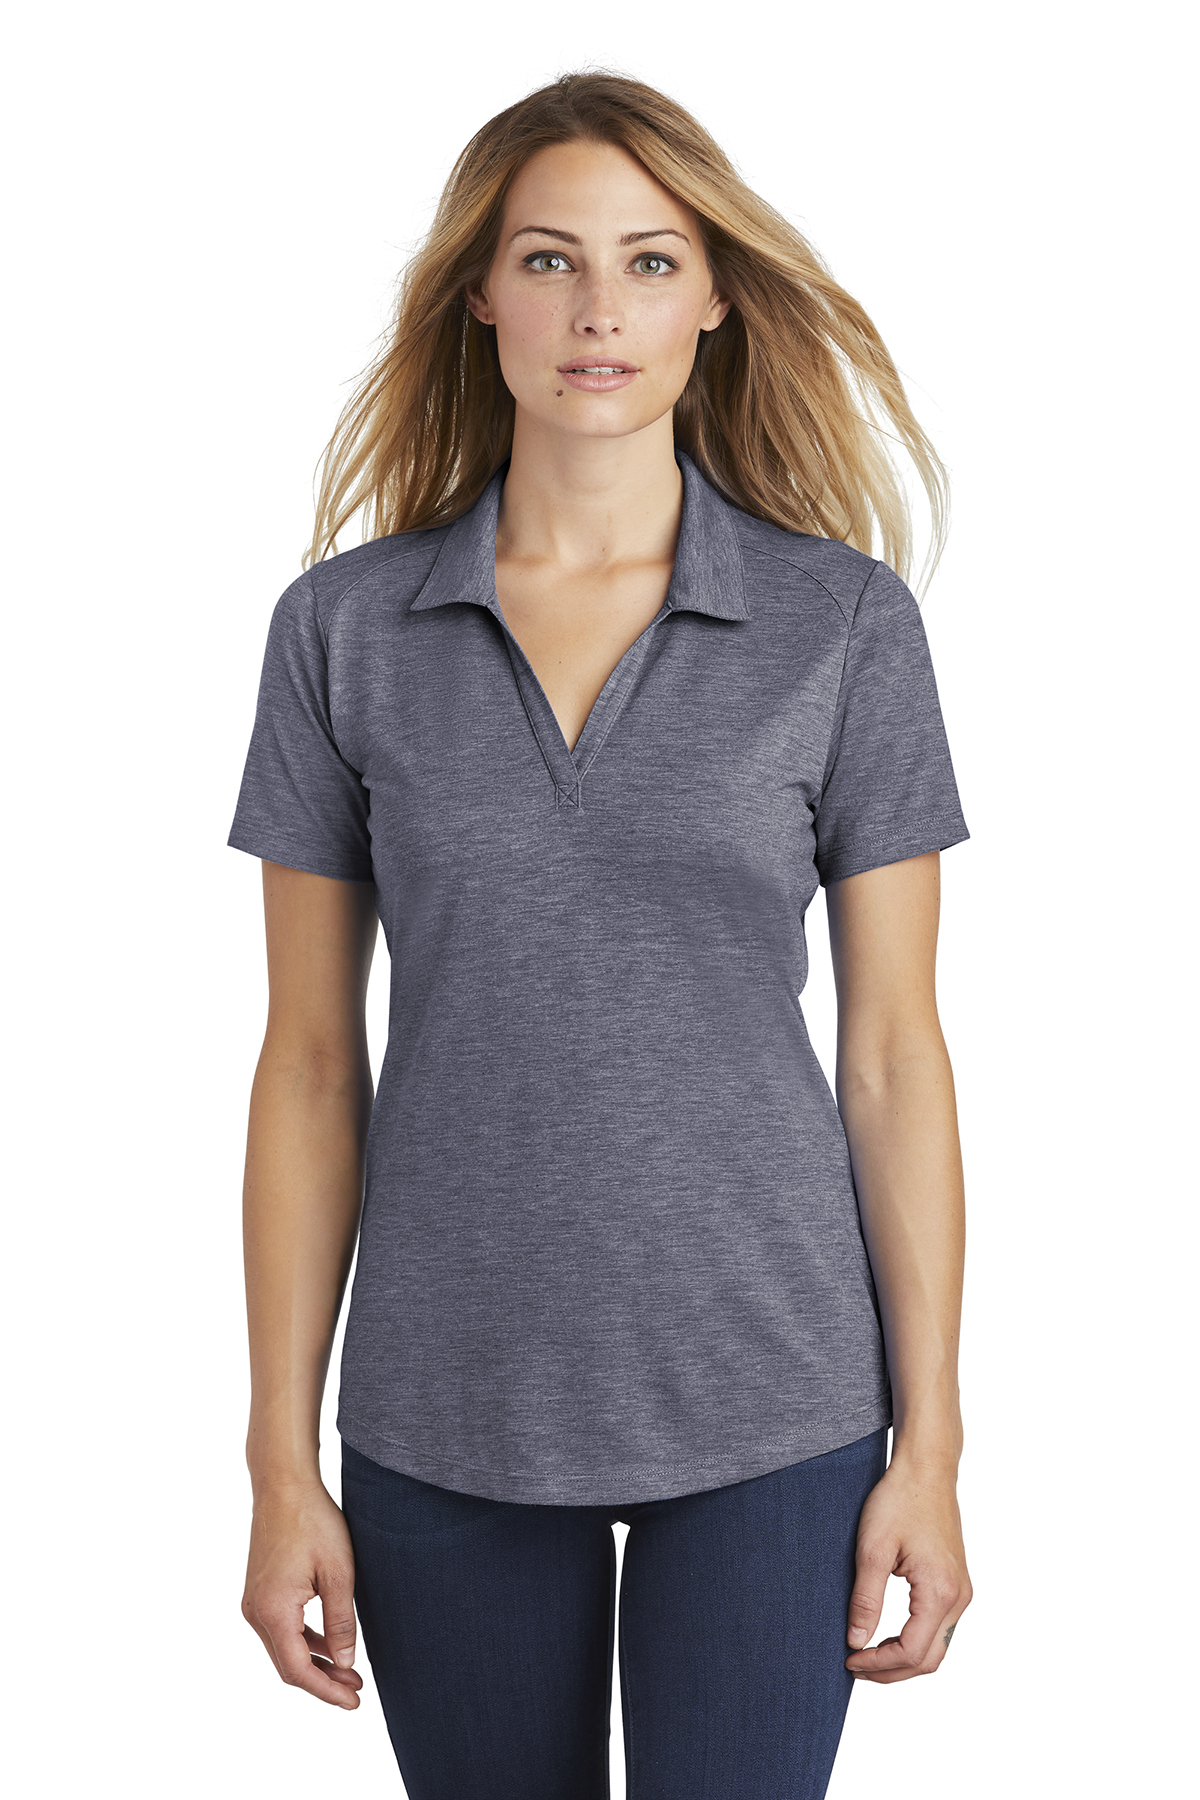 click to view True Navy Heather